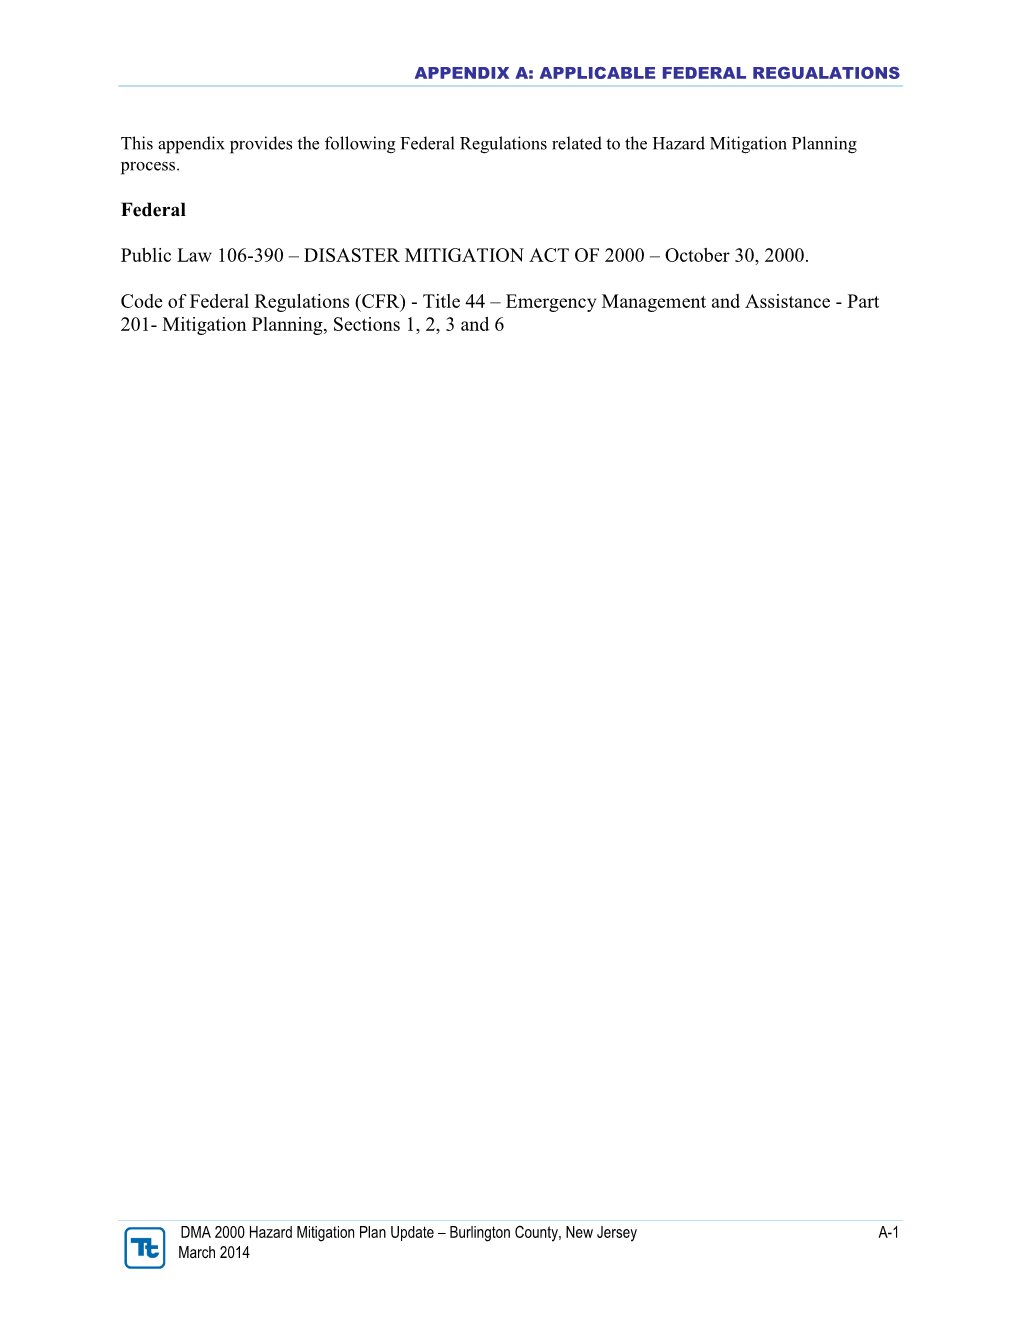 DISASTER MITIGATION ACT of 2000 – October 30, 2000